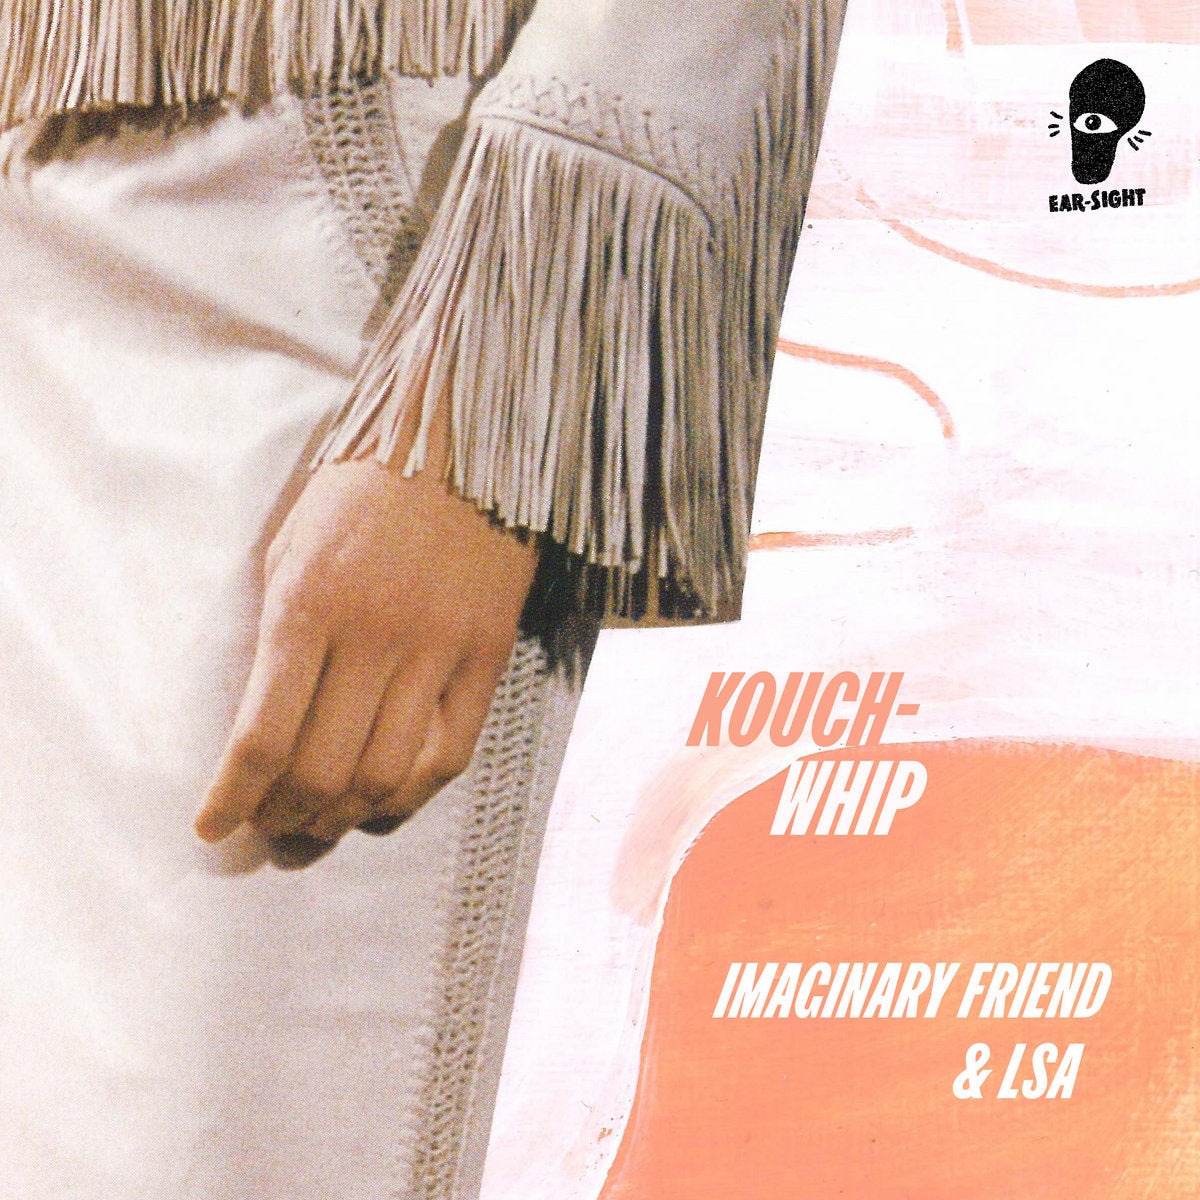 KOUCHWHIP | Imaginary Friend x LSA | Tapes